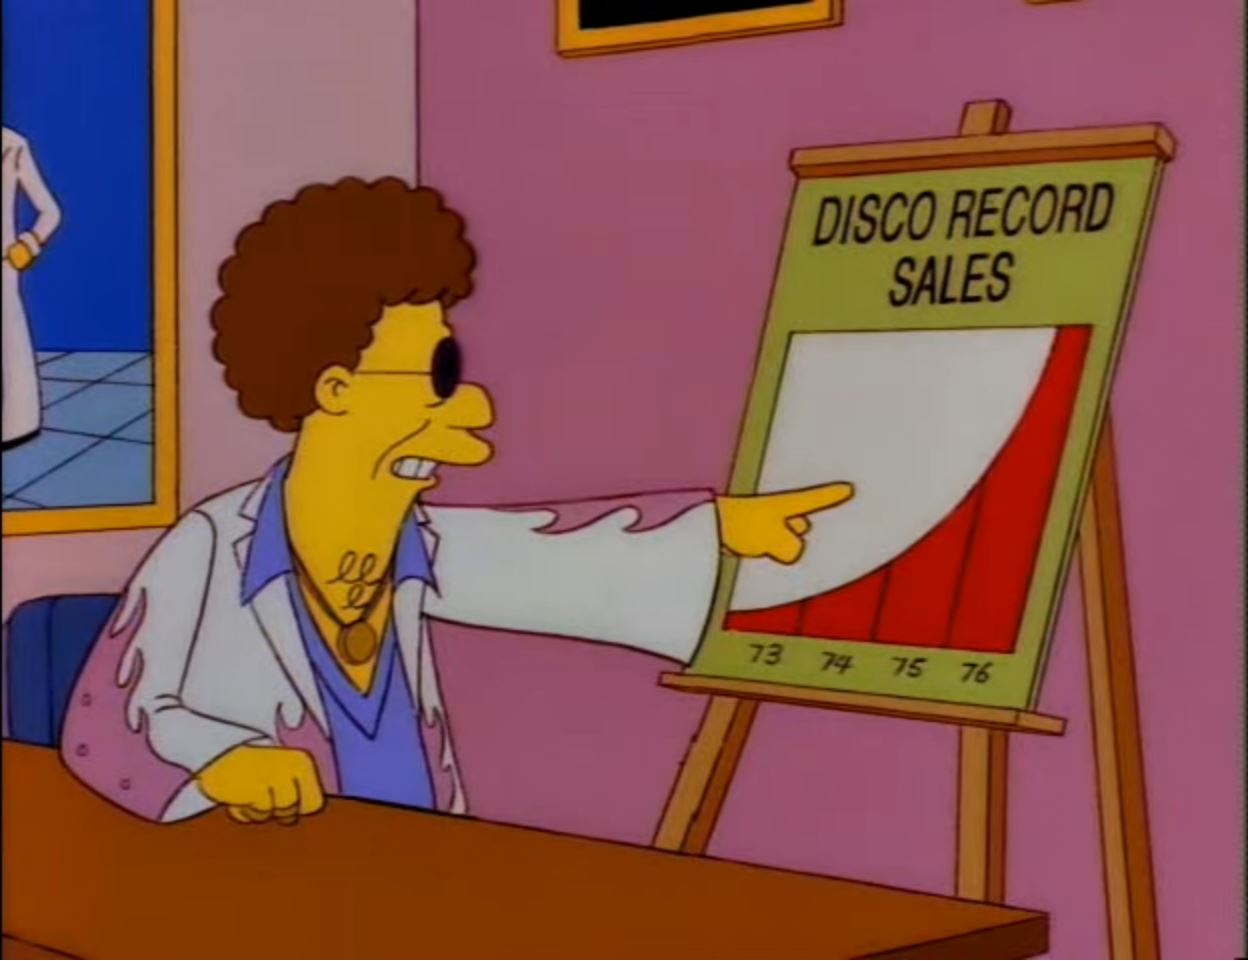 Disco Stu pointing at a graph of growing disco record sales from 1973 to 1976